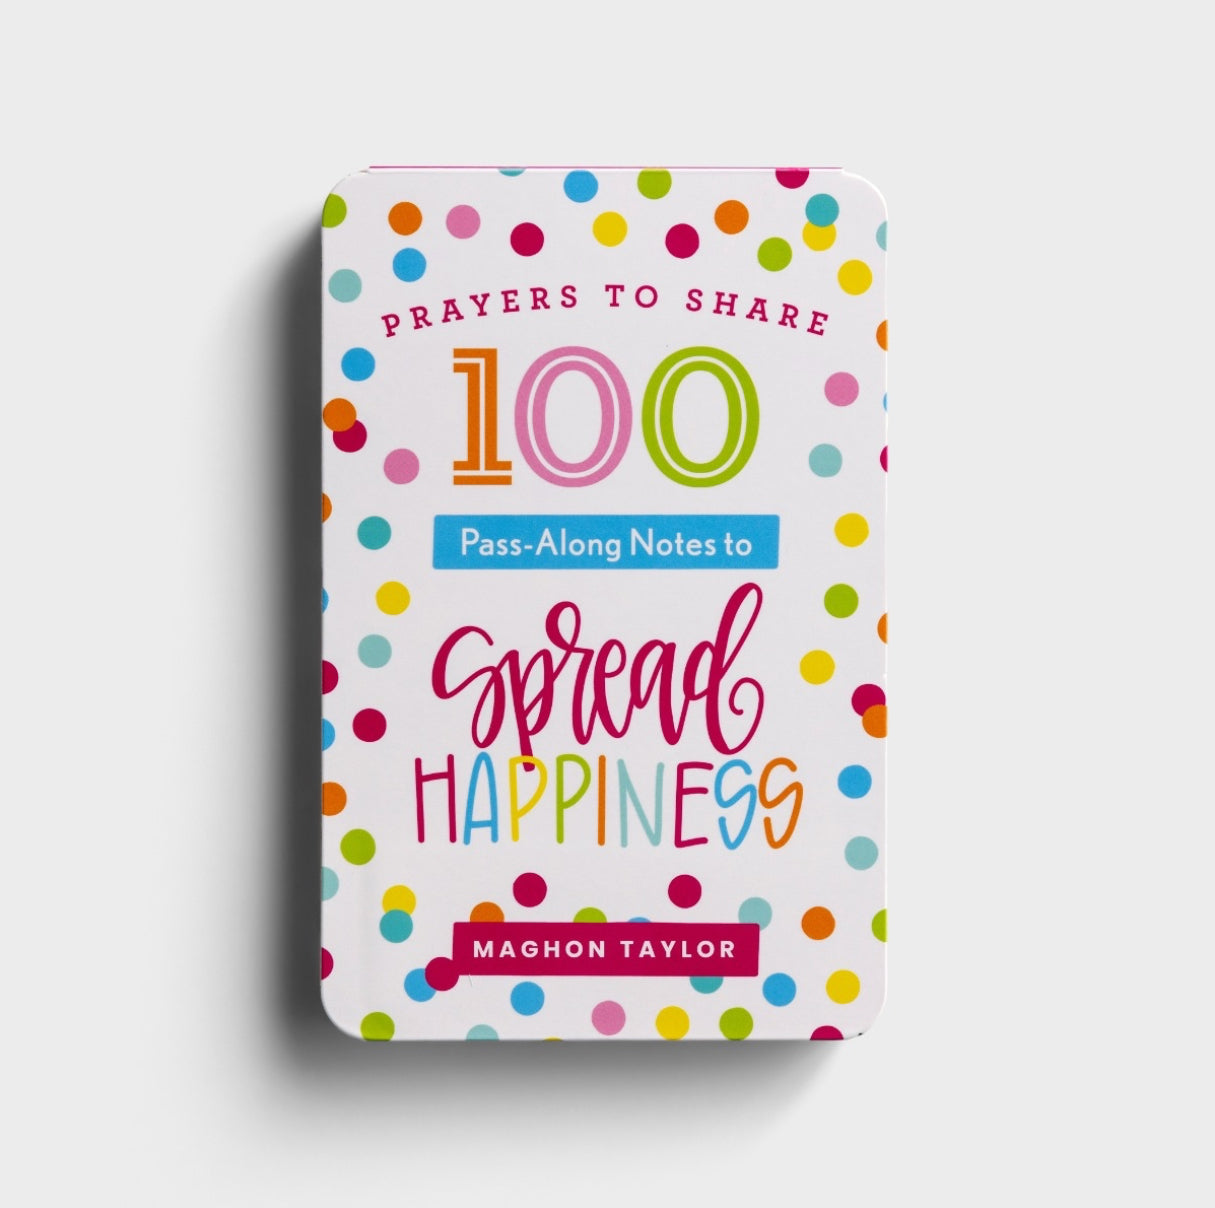 100 Pass-Along Notes to Spread Happiness